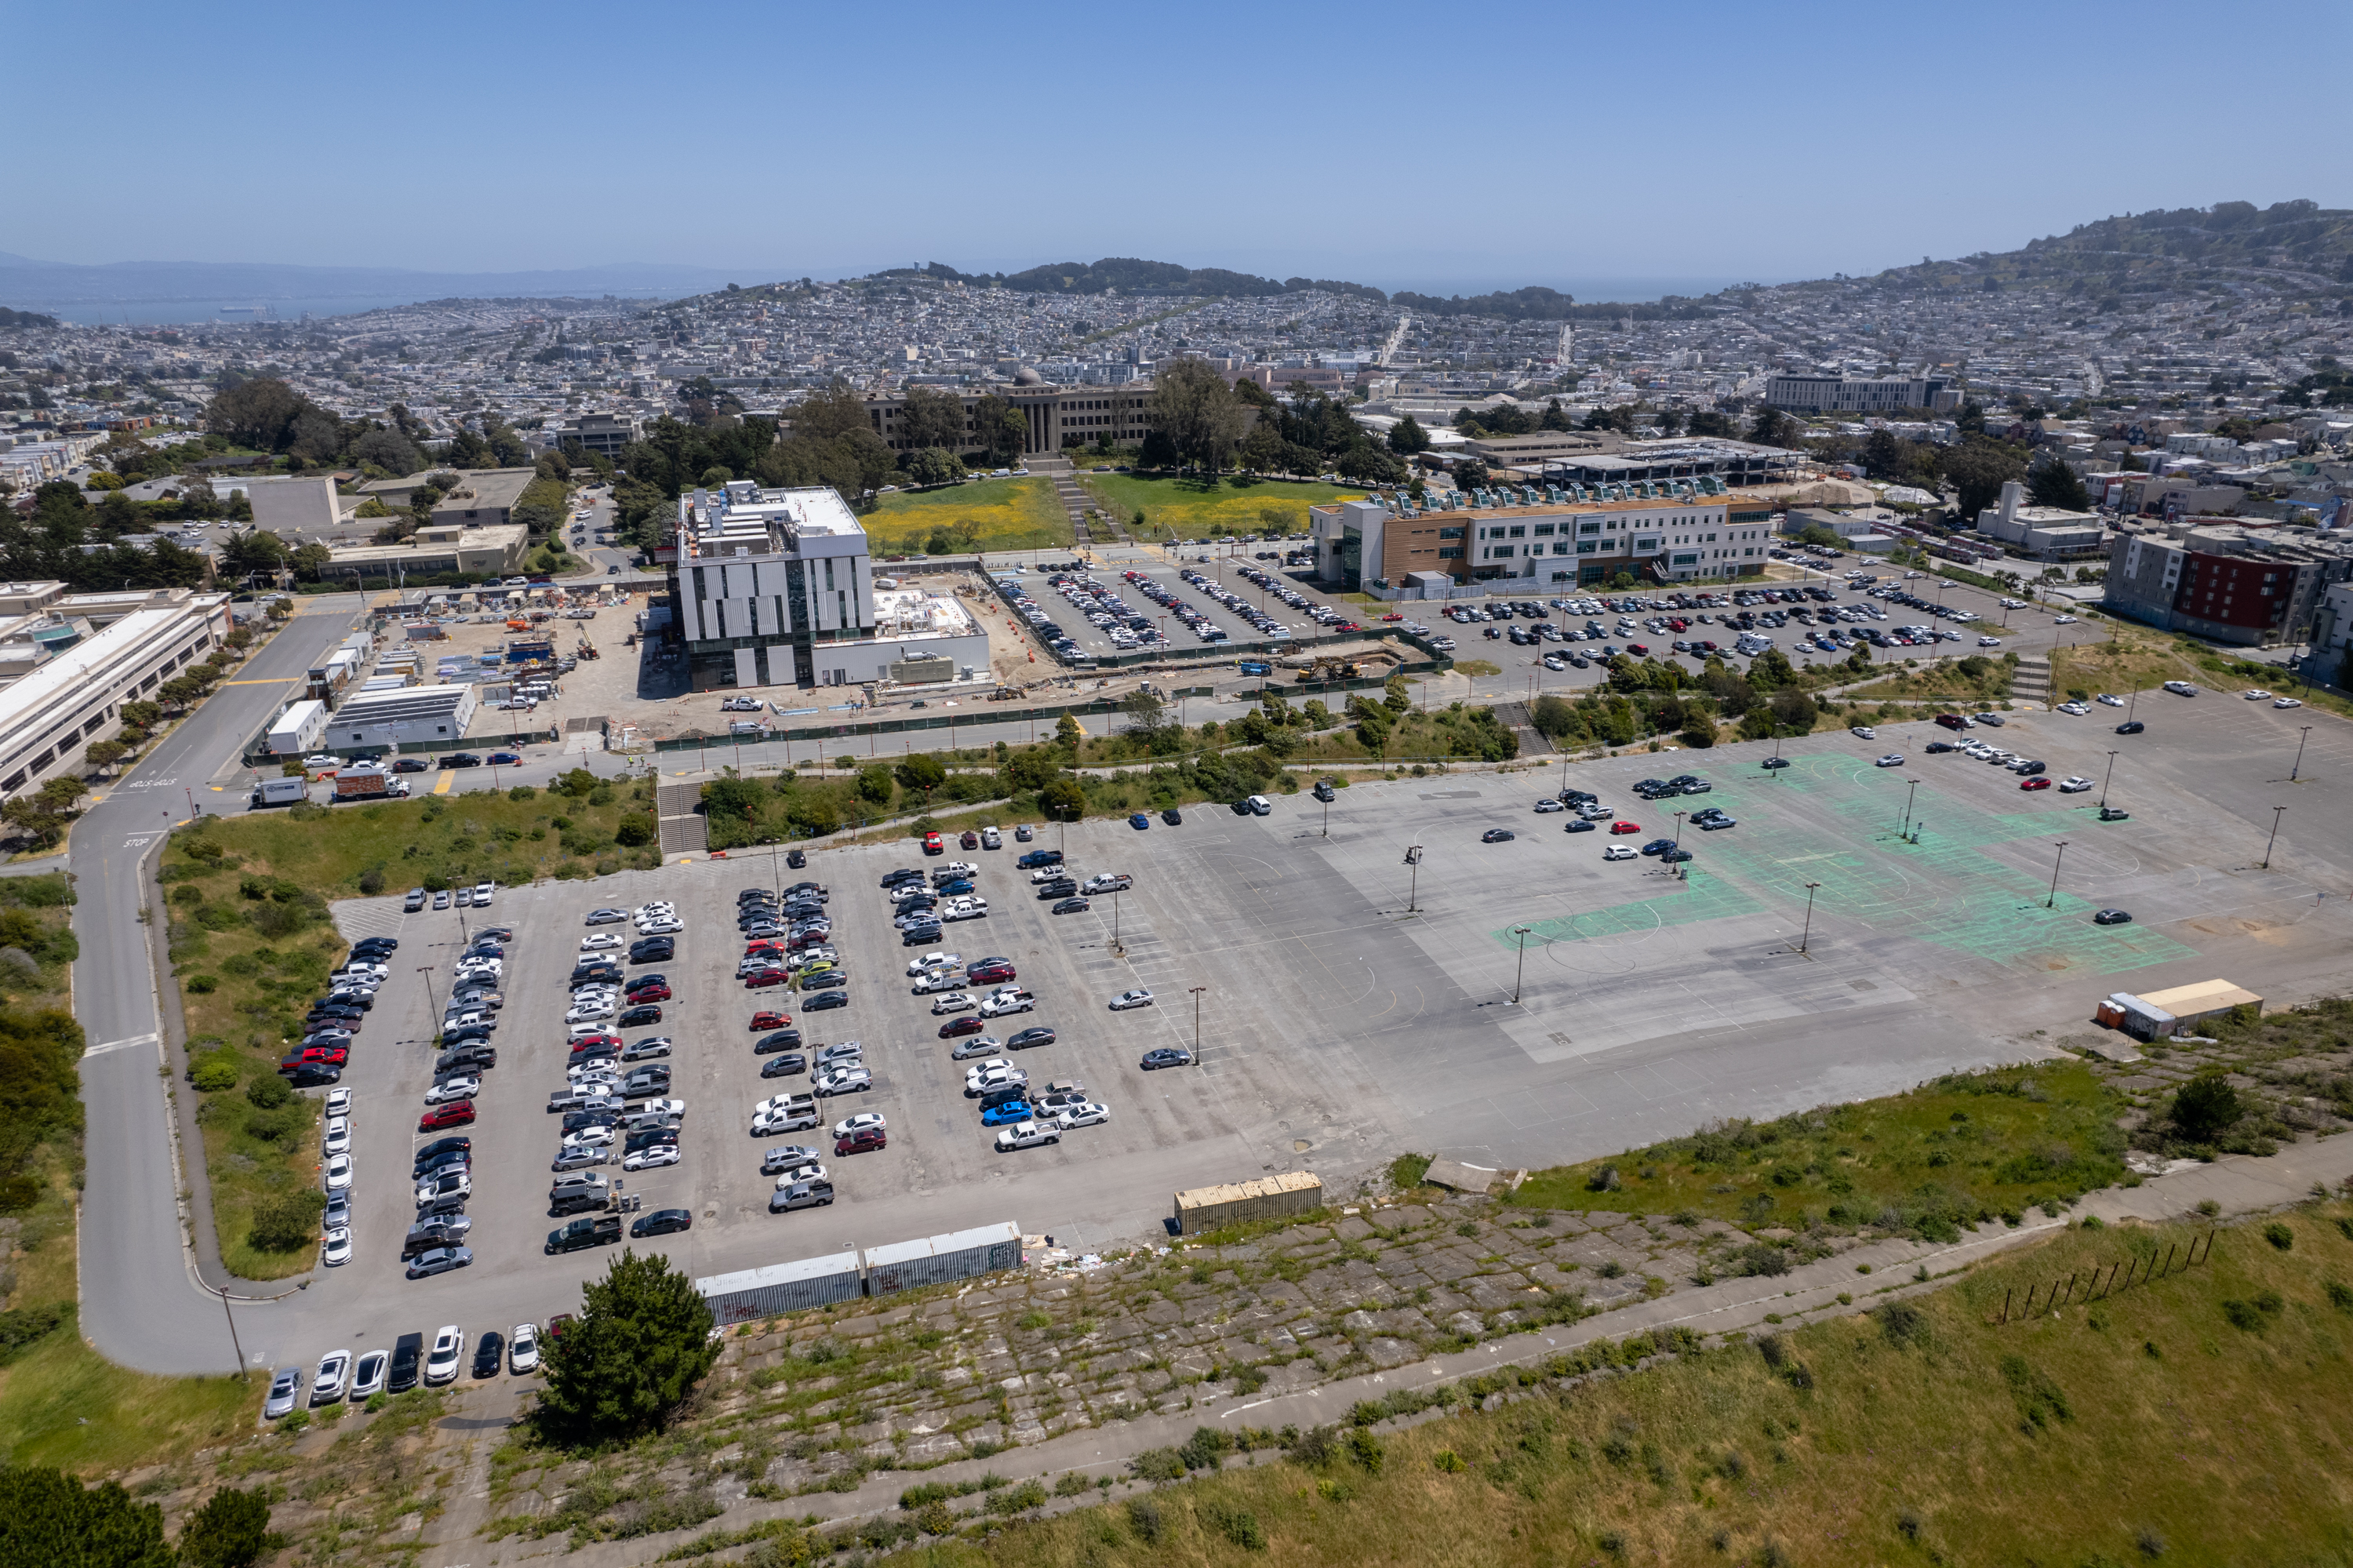 An aerial view of a large parking lot with cars, buildings nearby, and a hilly cityscape in the distance.